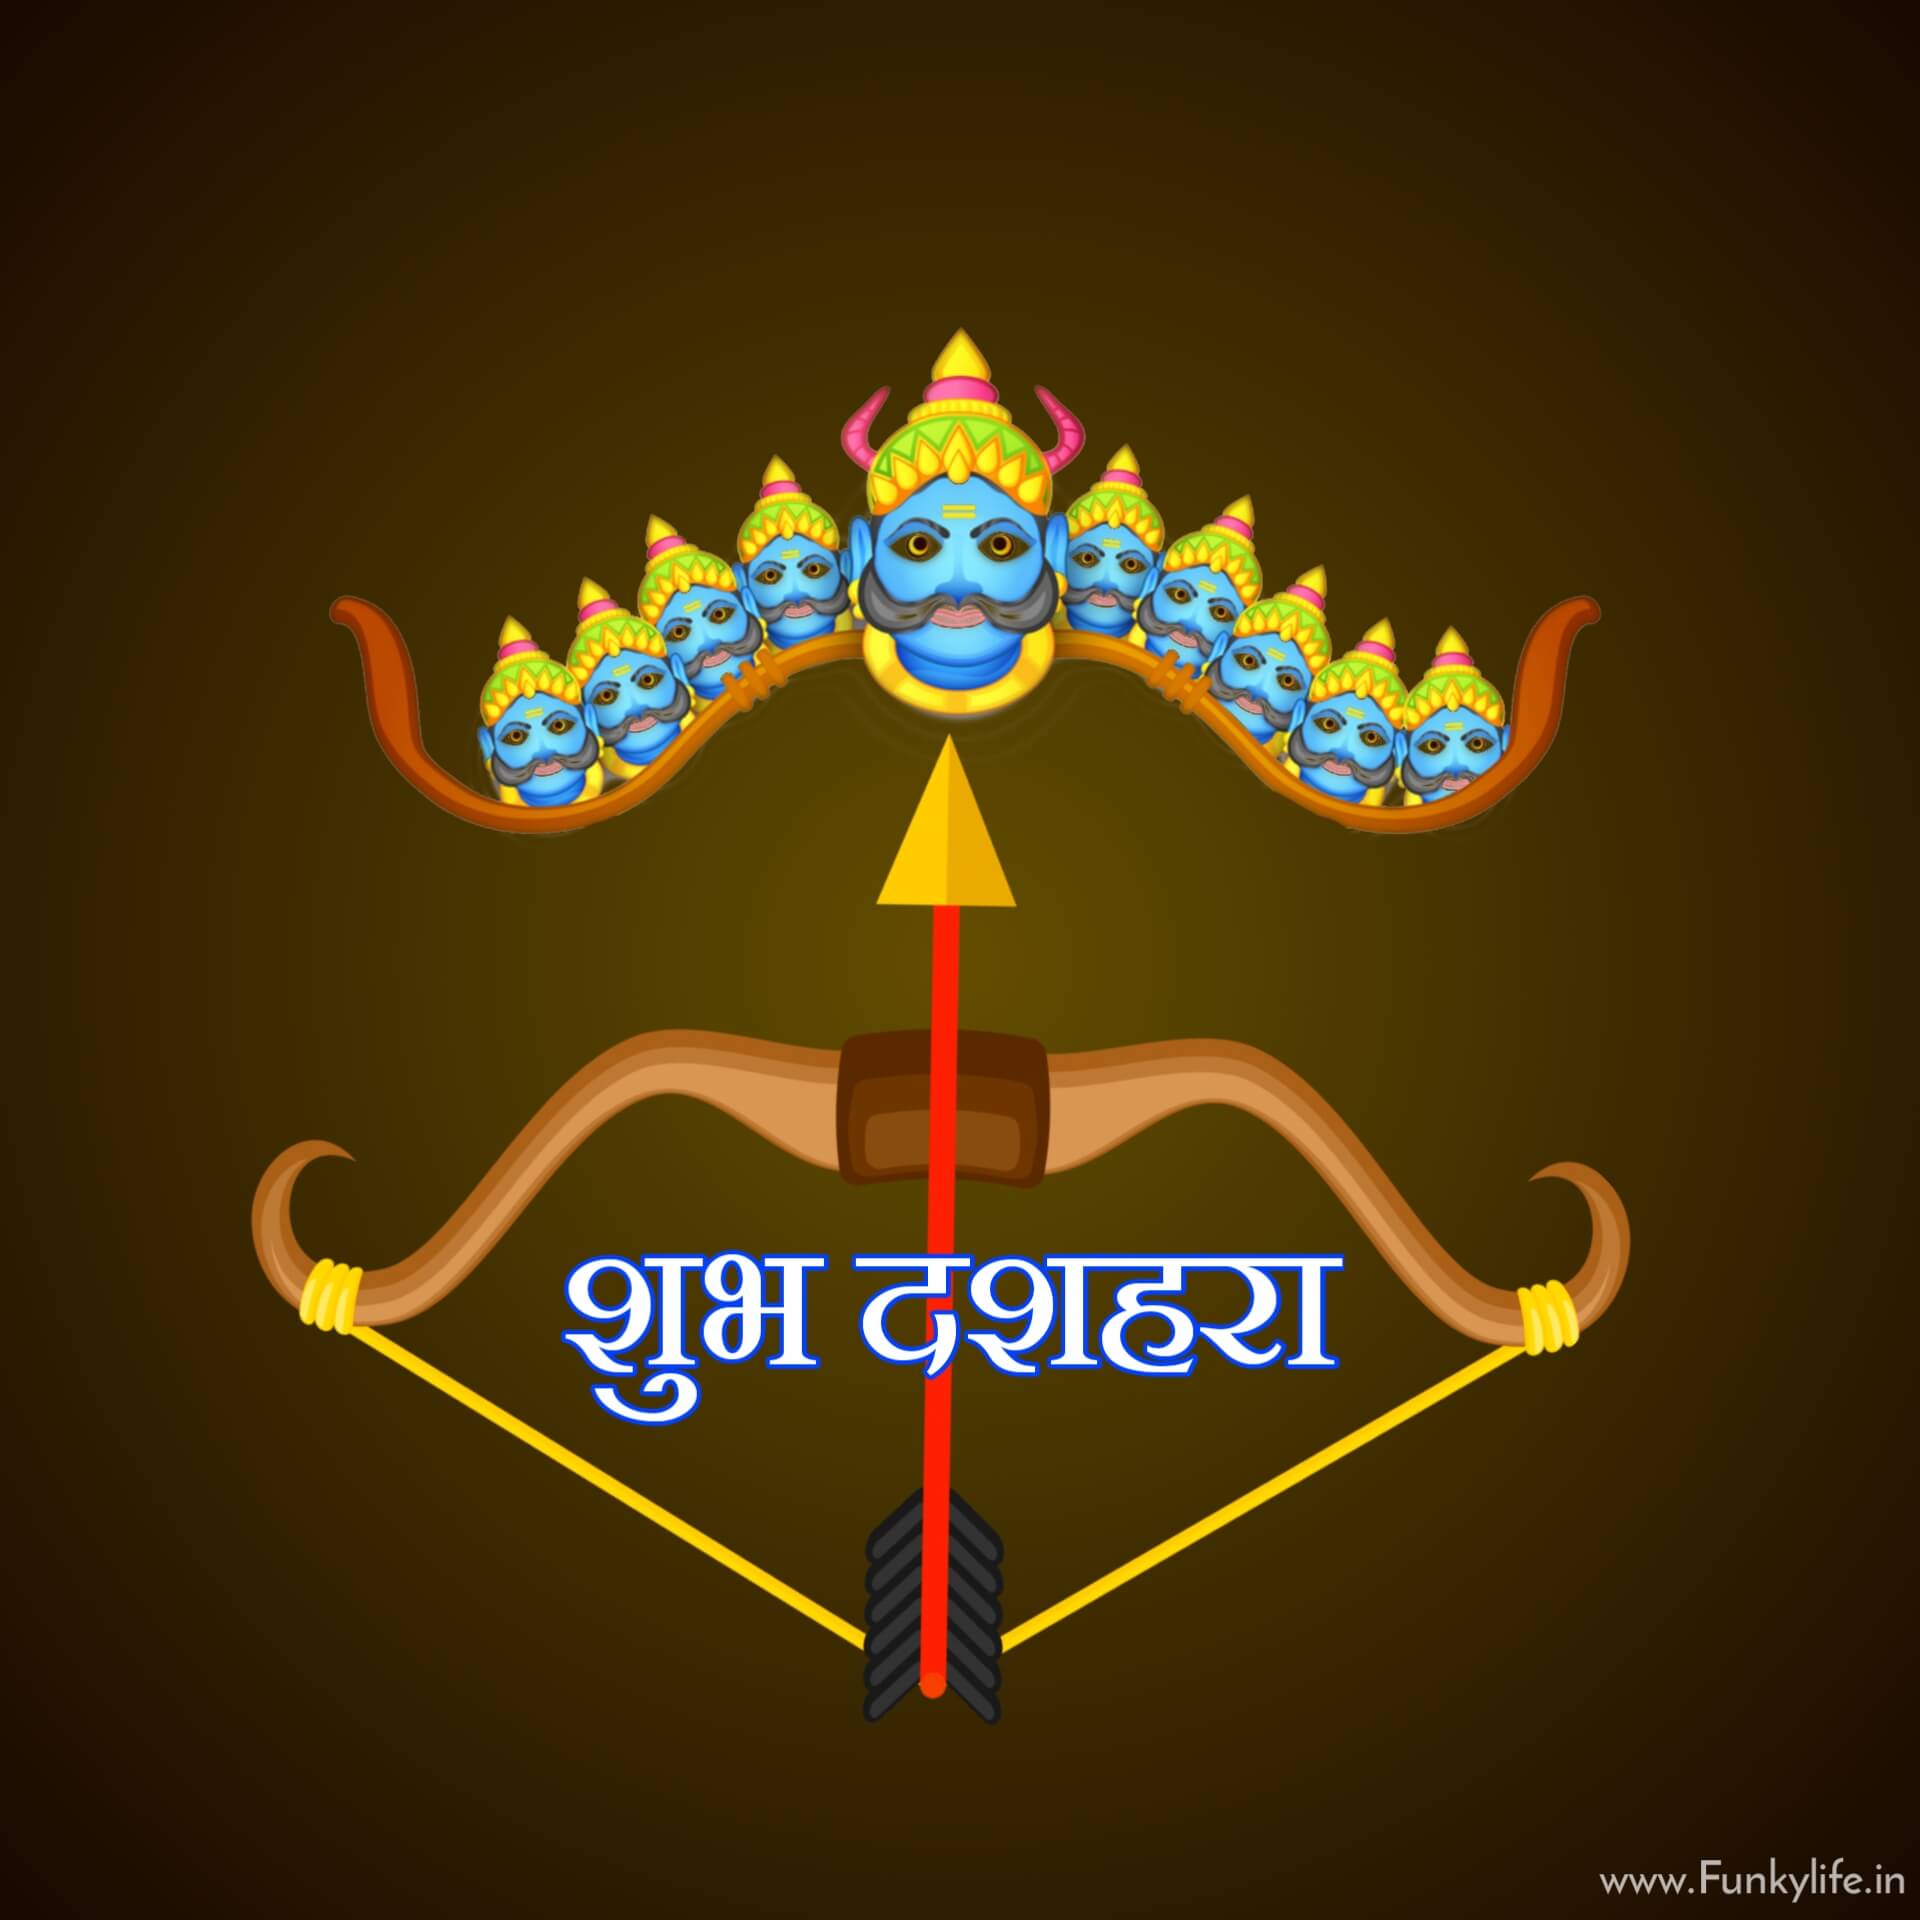 Shubh Dussehra Wishes Pic